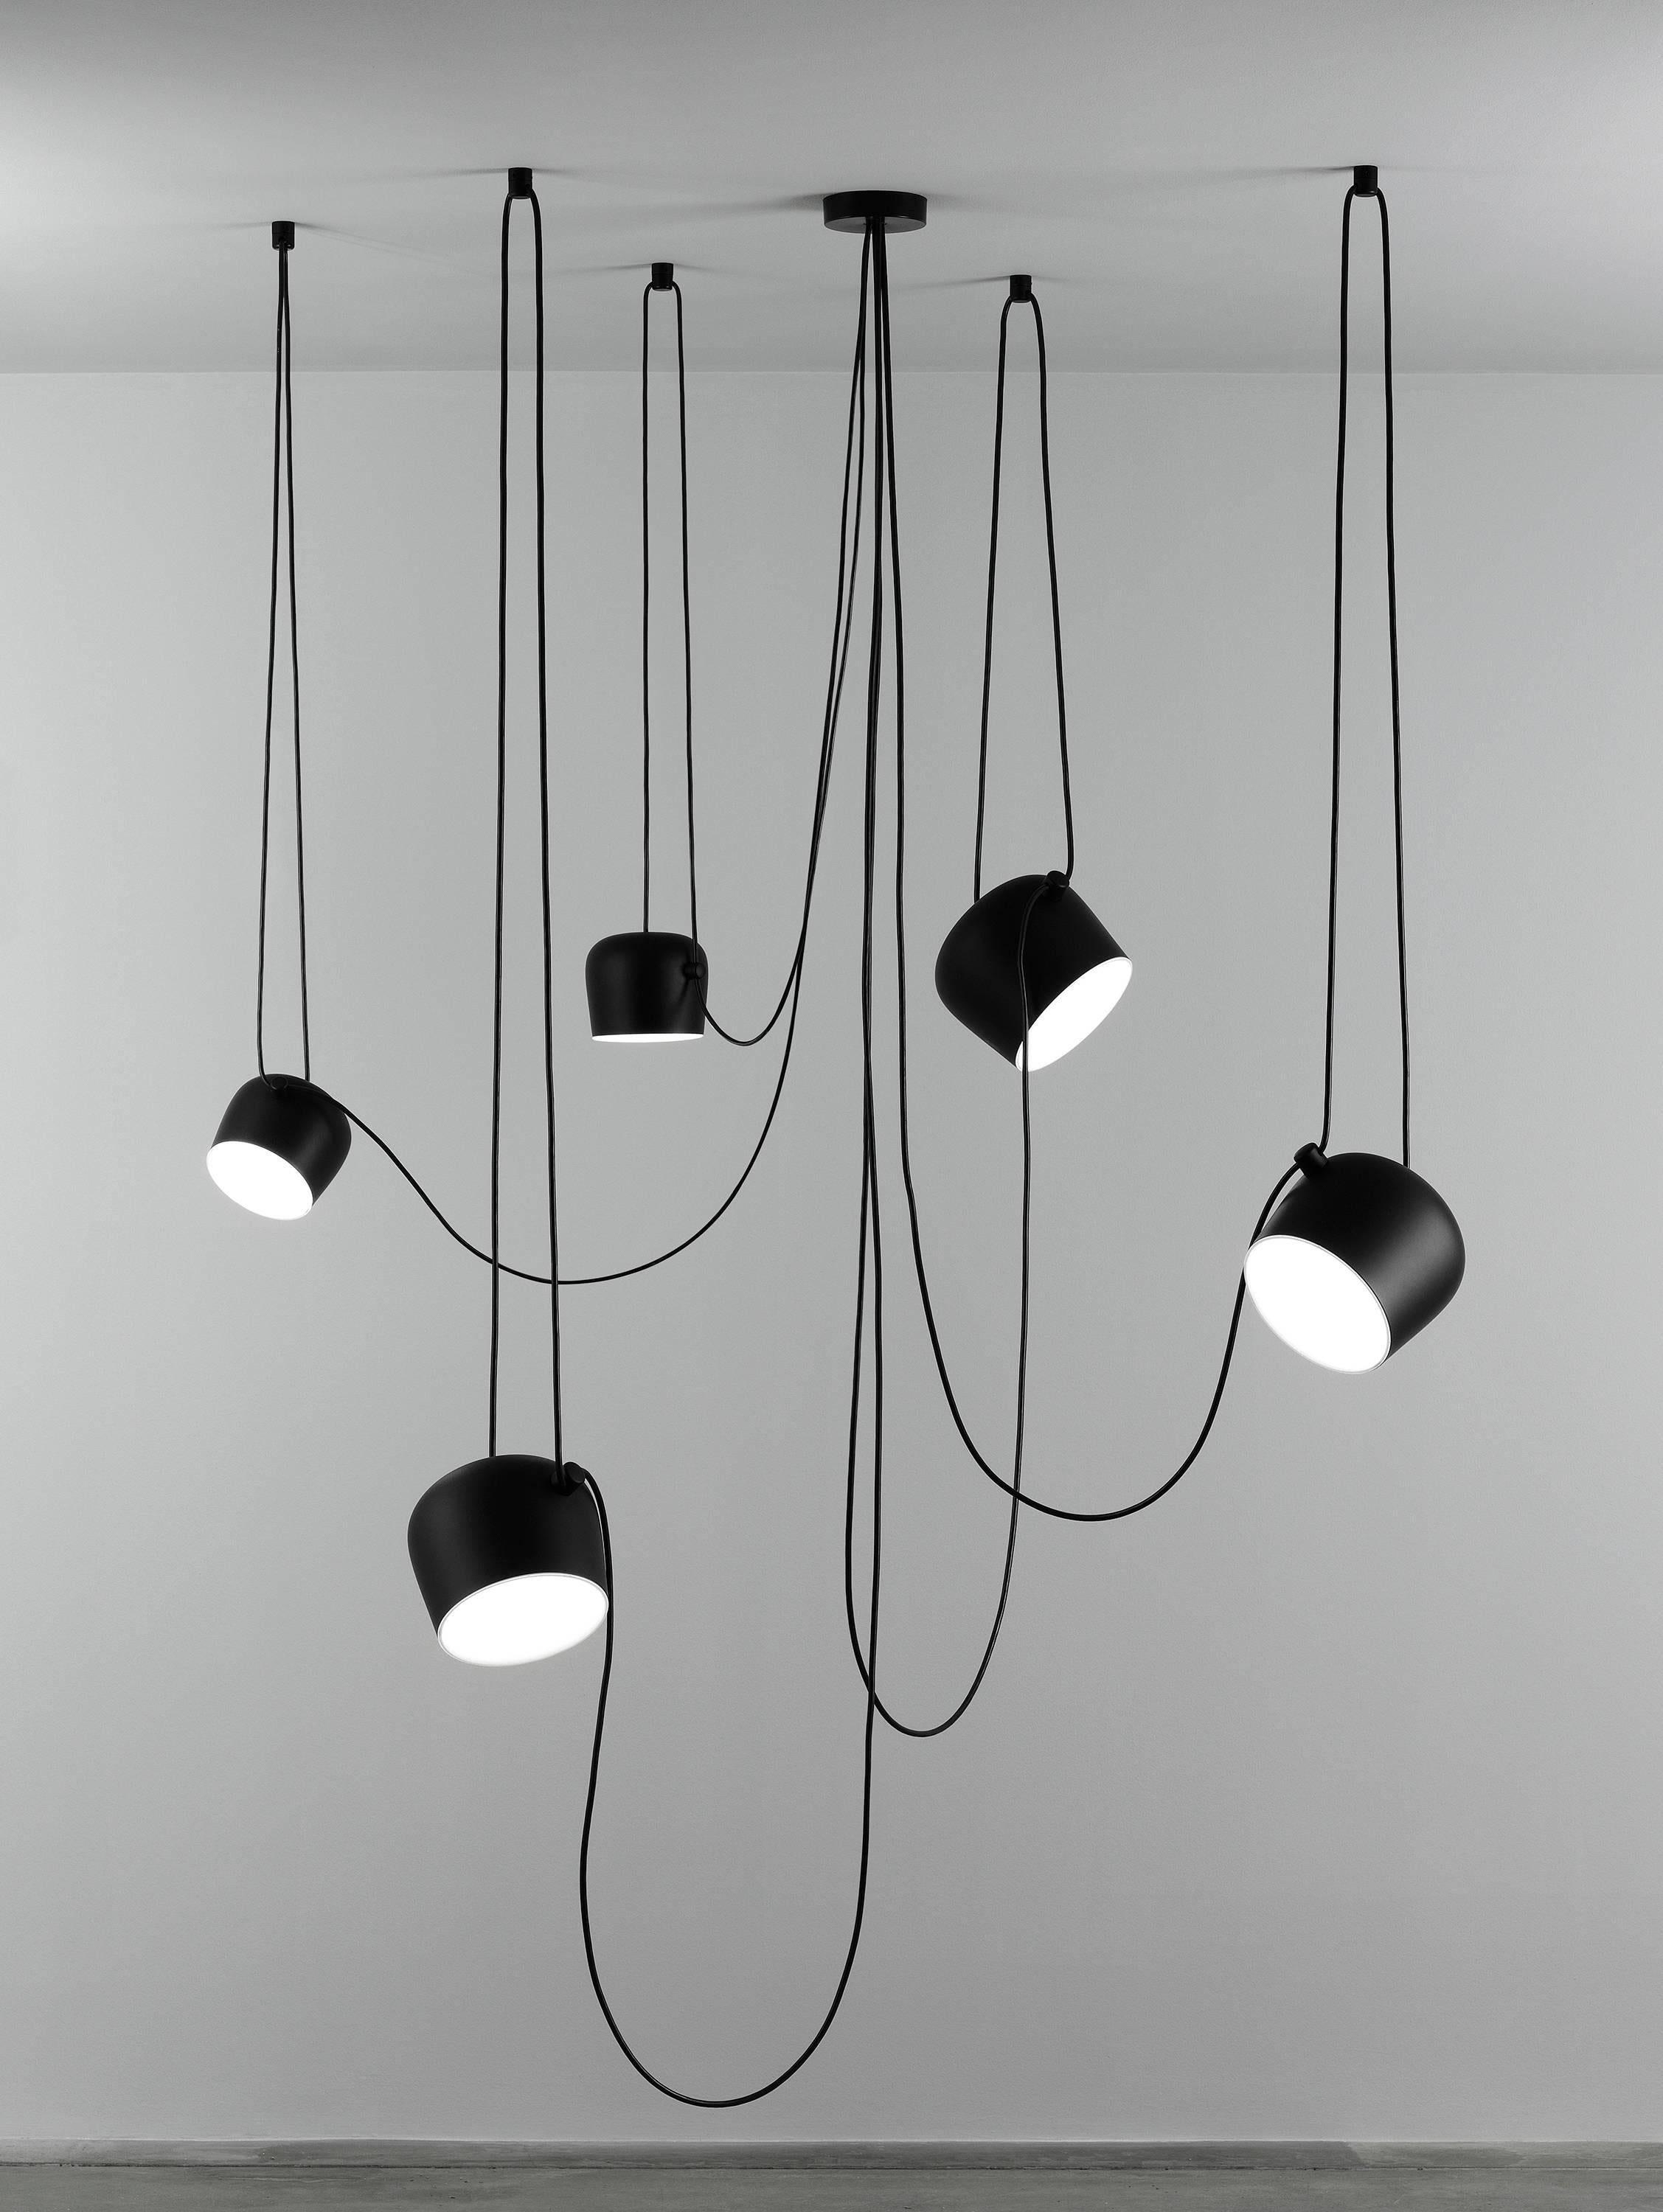 FLOS Aim Black Five-Lamp Light Set w/ Canopy by Ronan & Erwan Bouroullec

Created by the Bouroullec brothers in 2010, the AIM ceiling light is a design stripped to its most basic—and beautiful—essence. This innovative form of modern pendant lighting